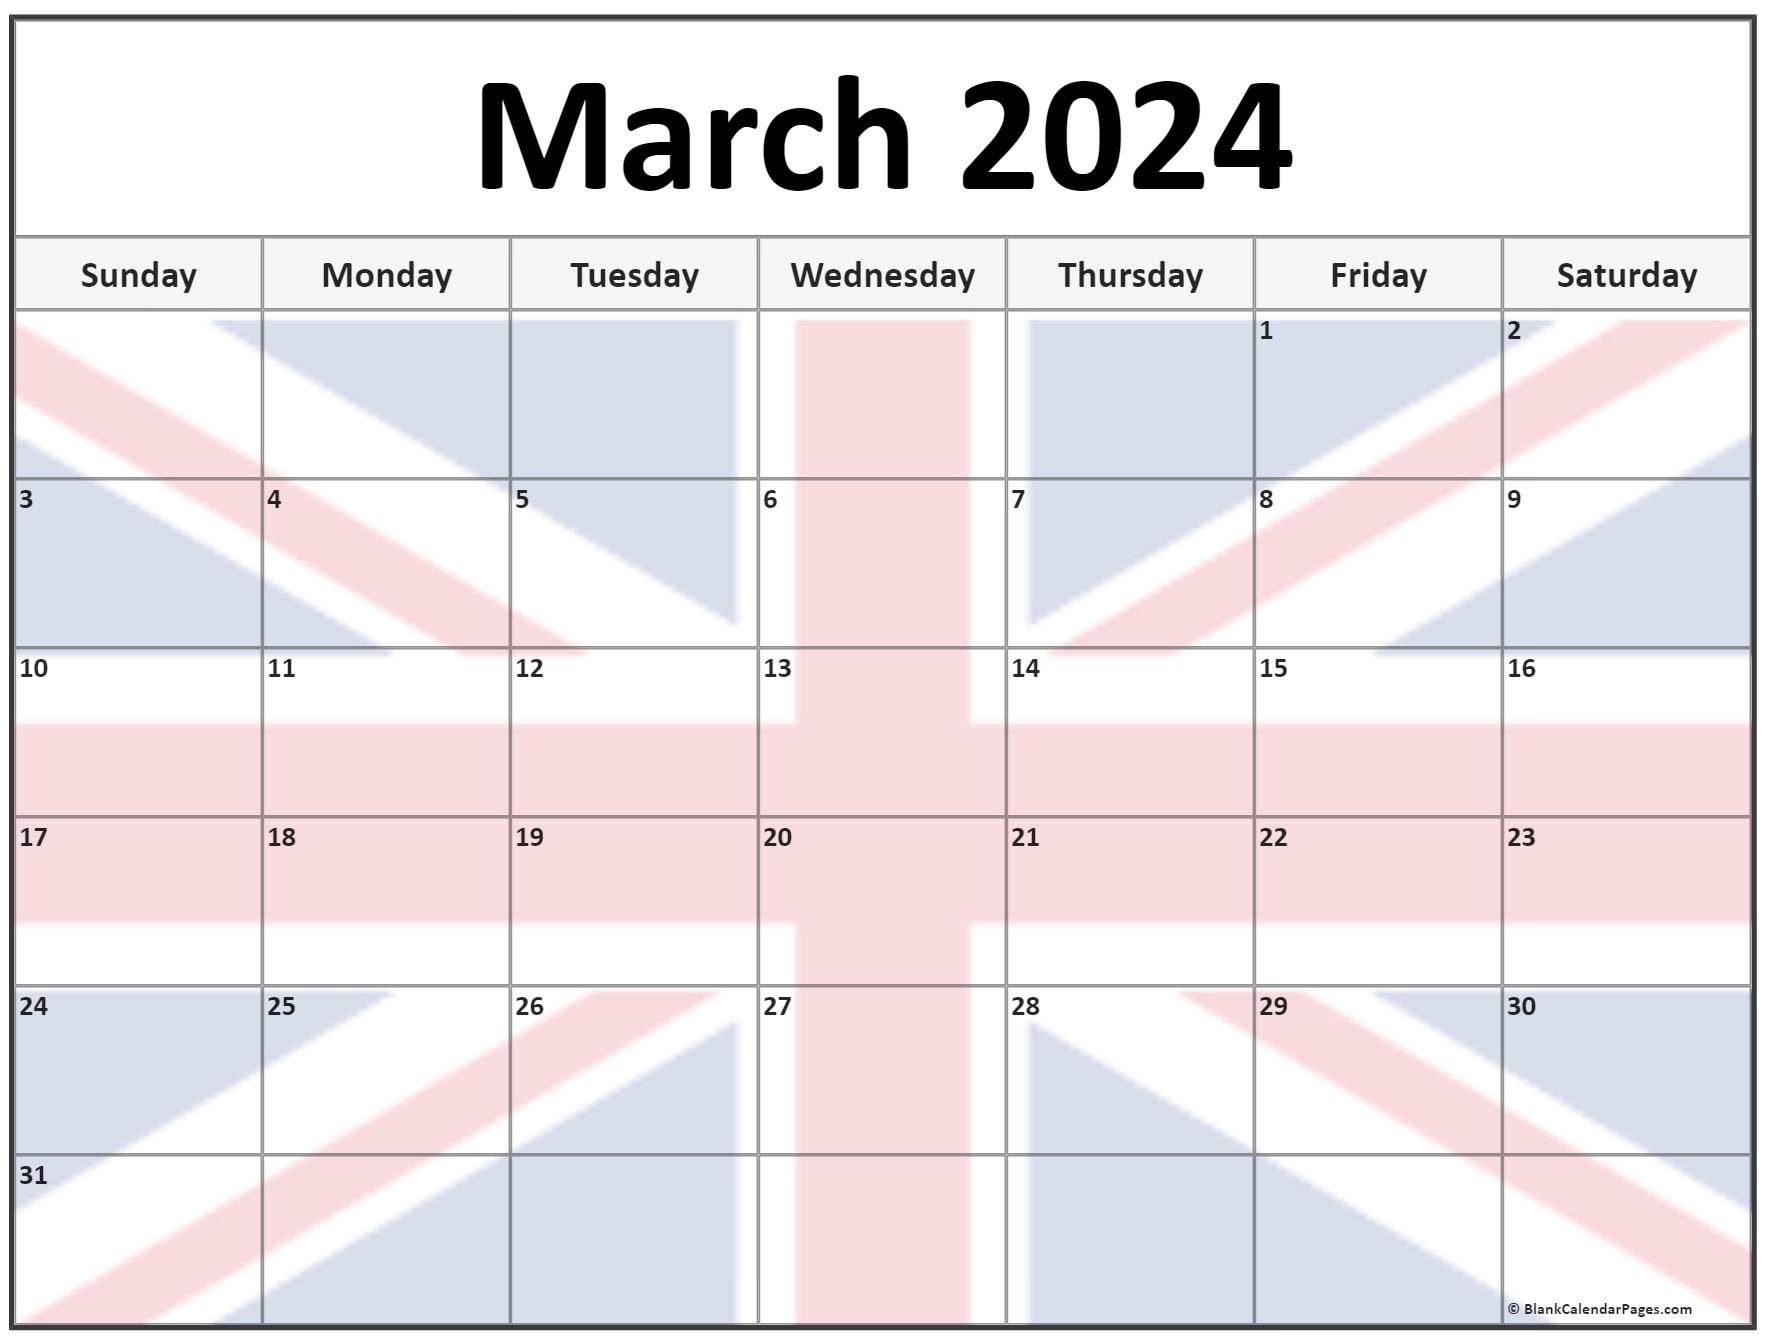 collection-of-march-2023-photo-calendars-with-image-filters